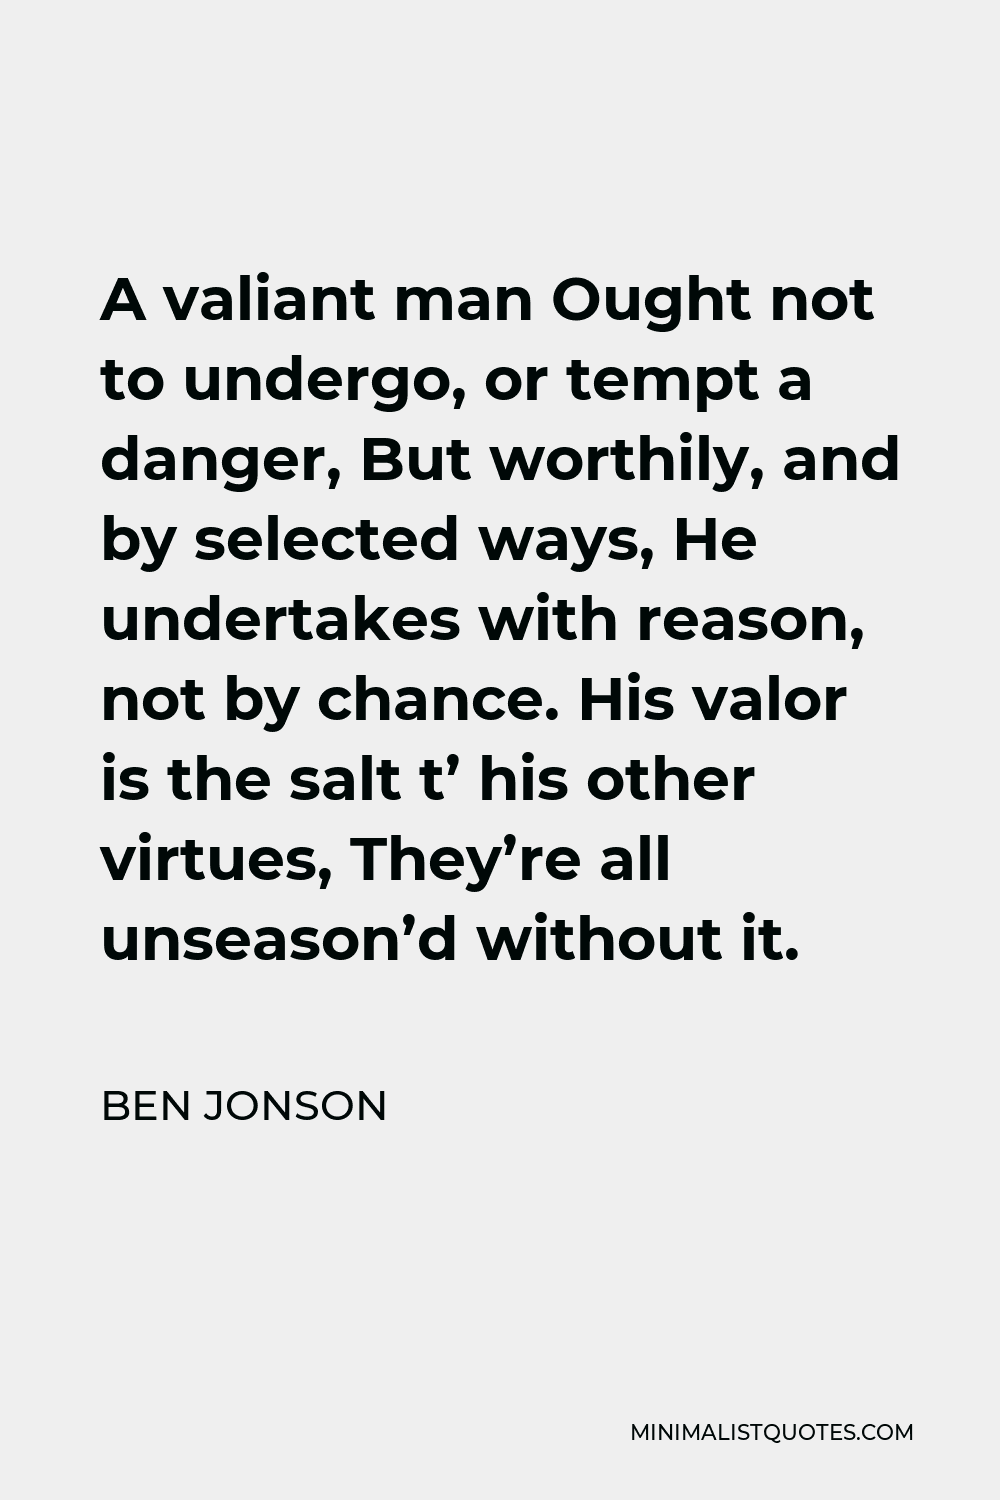 Ben Jonson Quote - A valiant man Ought not to undergo, or tempt a danger, But worthily, and by selected ways, He undertakes with reason, not by chance. His valor is the salt t’ his other virtues, They’re all unseason’d without it.